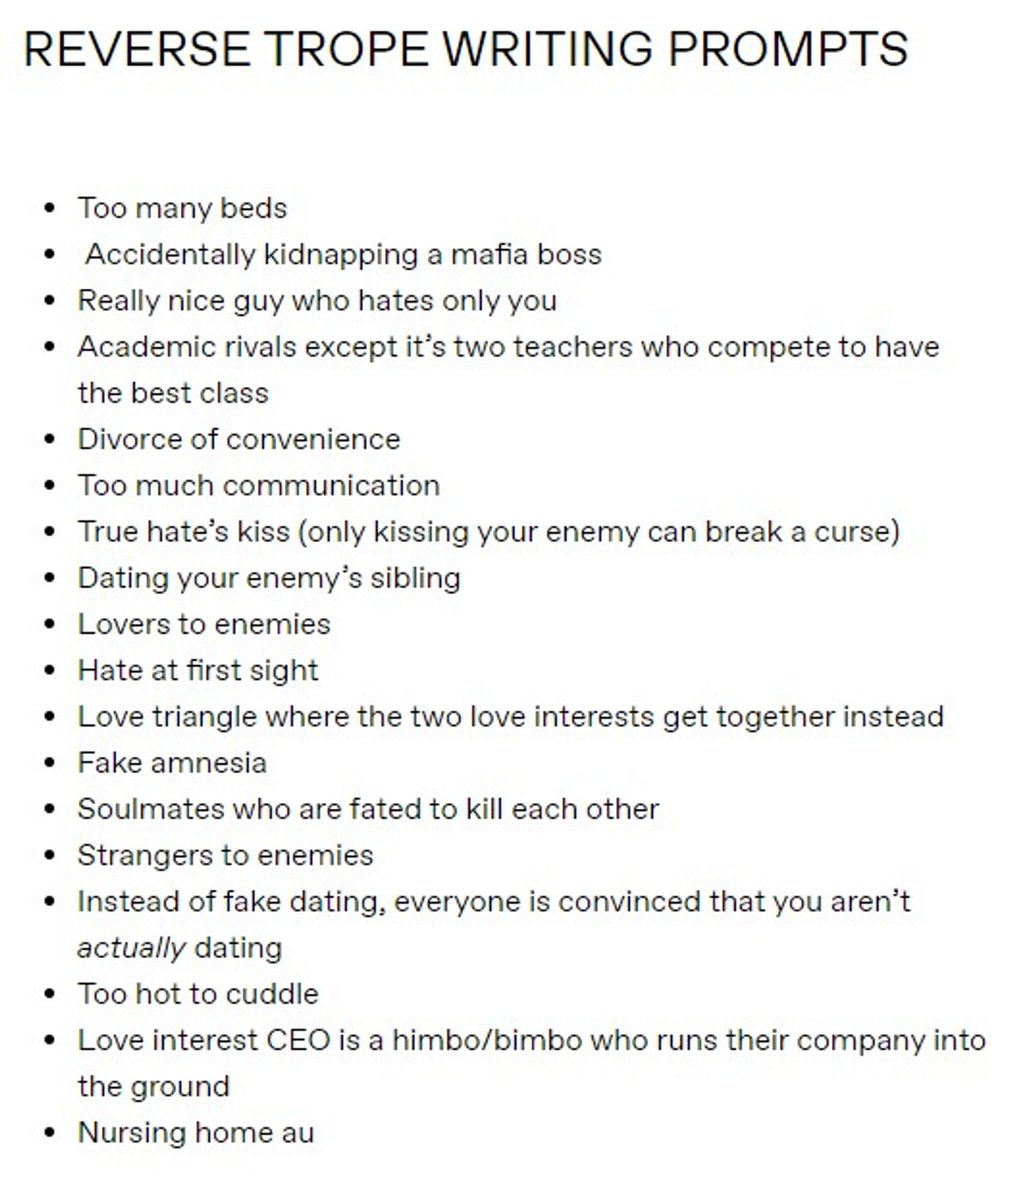 Oh, my. Some of these would be ... interesting. It might be fun to tackle everyone is convinced that you aren't dating. 😄 Would you read any of these?